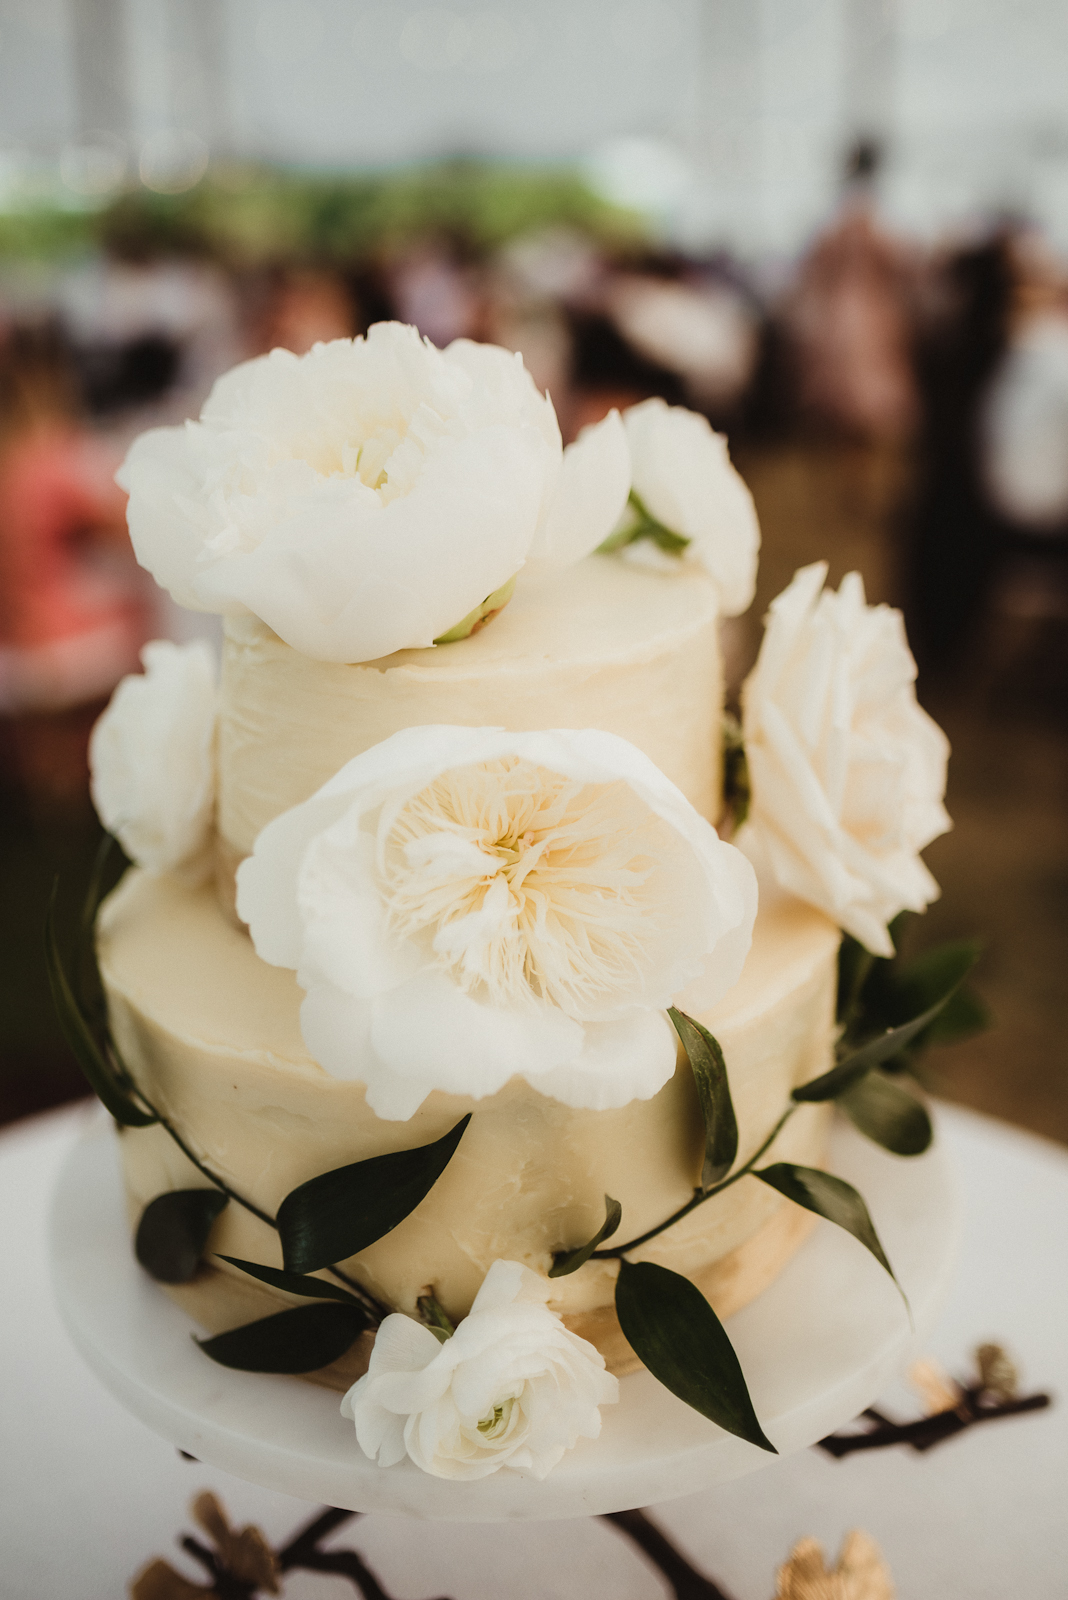 Simple Wedding Cake with White Flowers